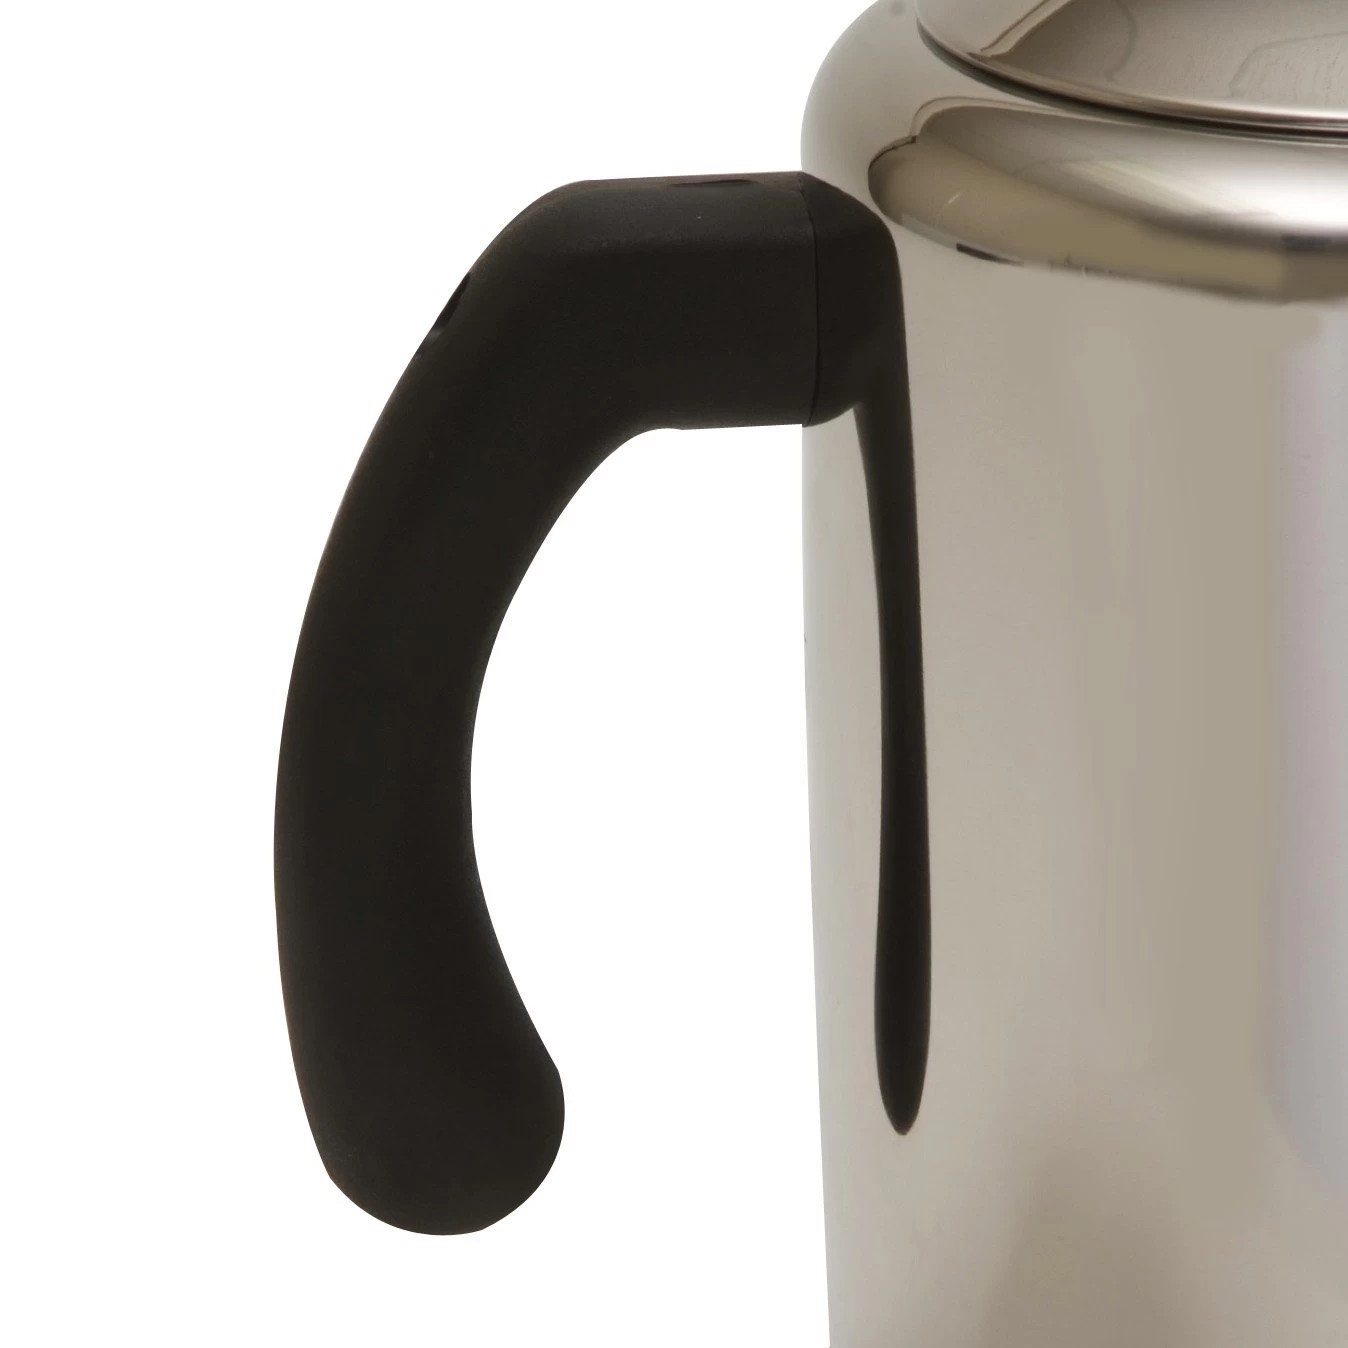 Stainless Steel  Coffee pot wholesales, China Stainless Steel Coffee Pot Factory, China Coffee pot company